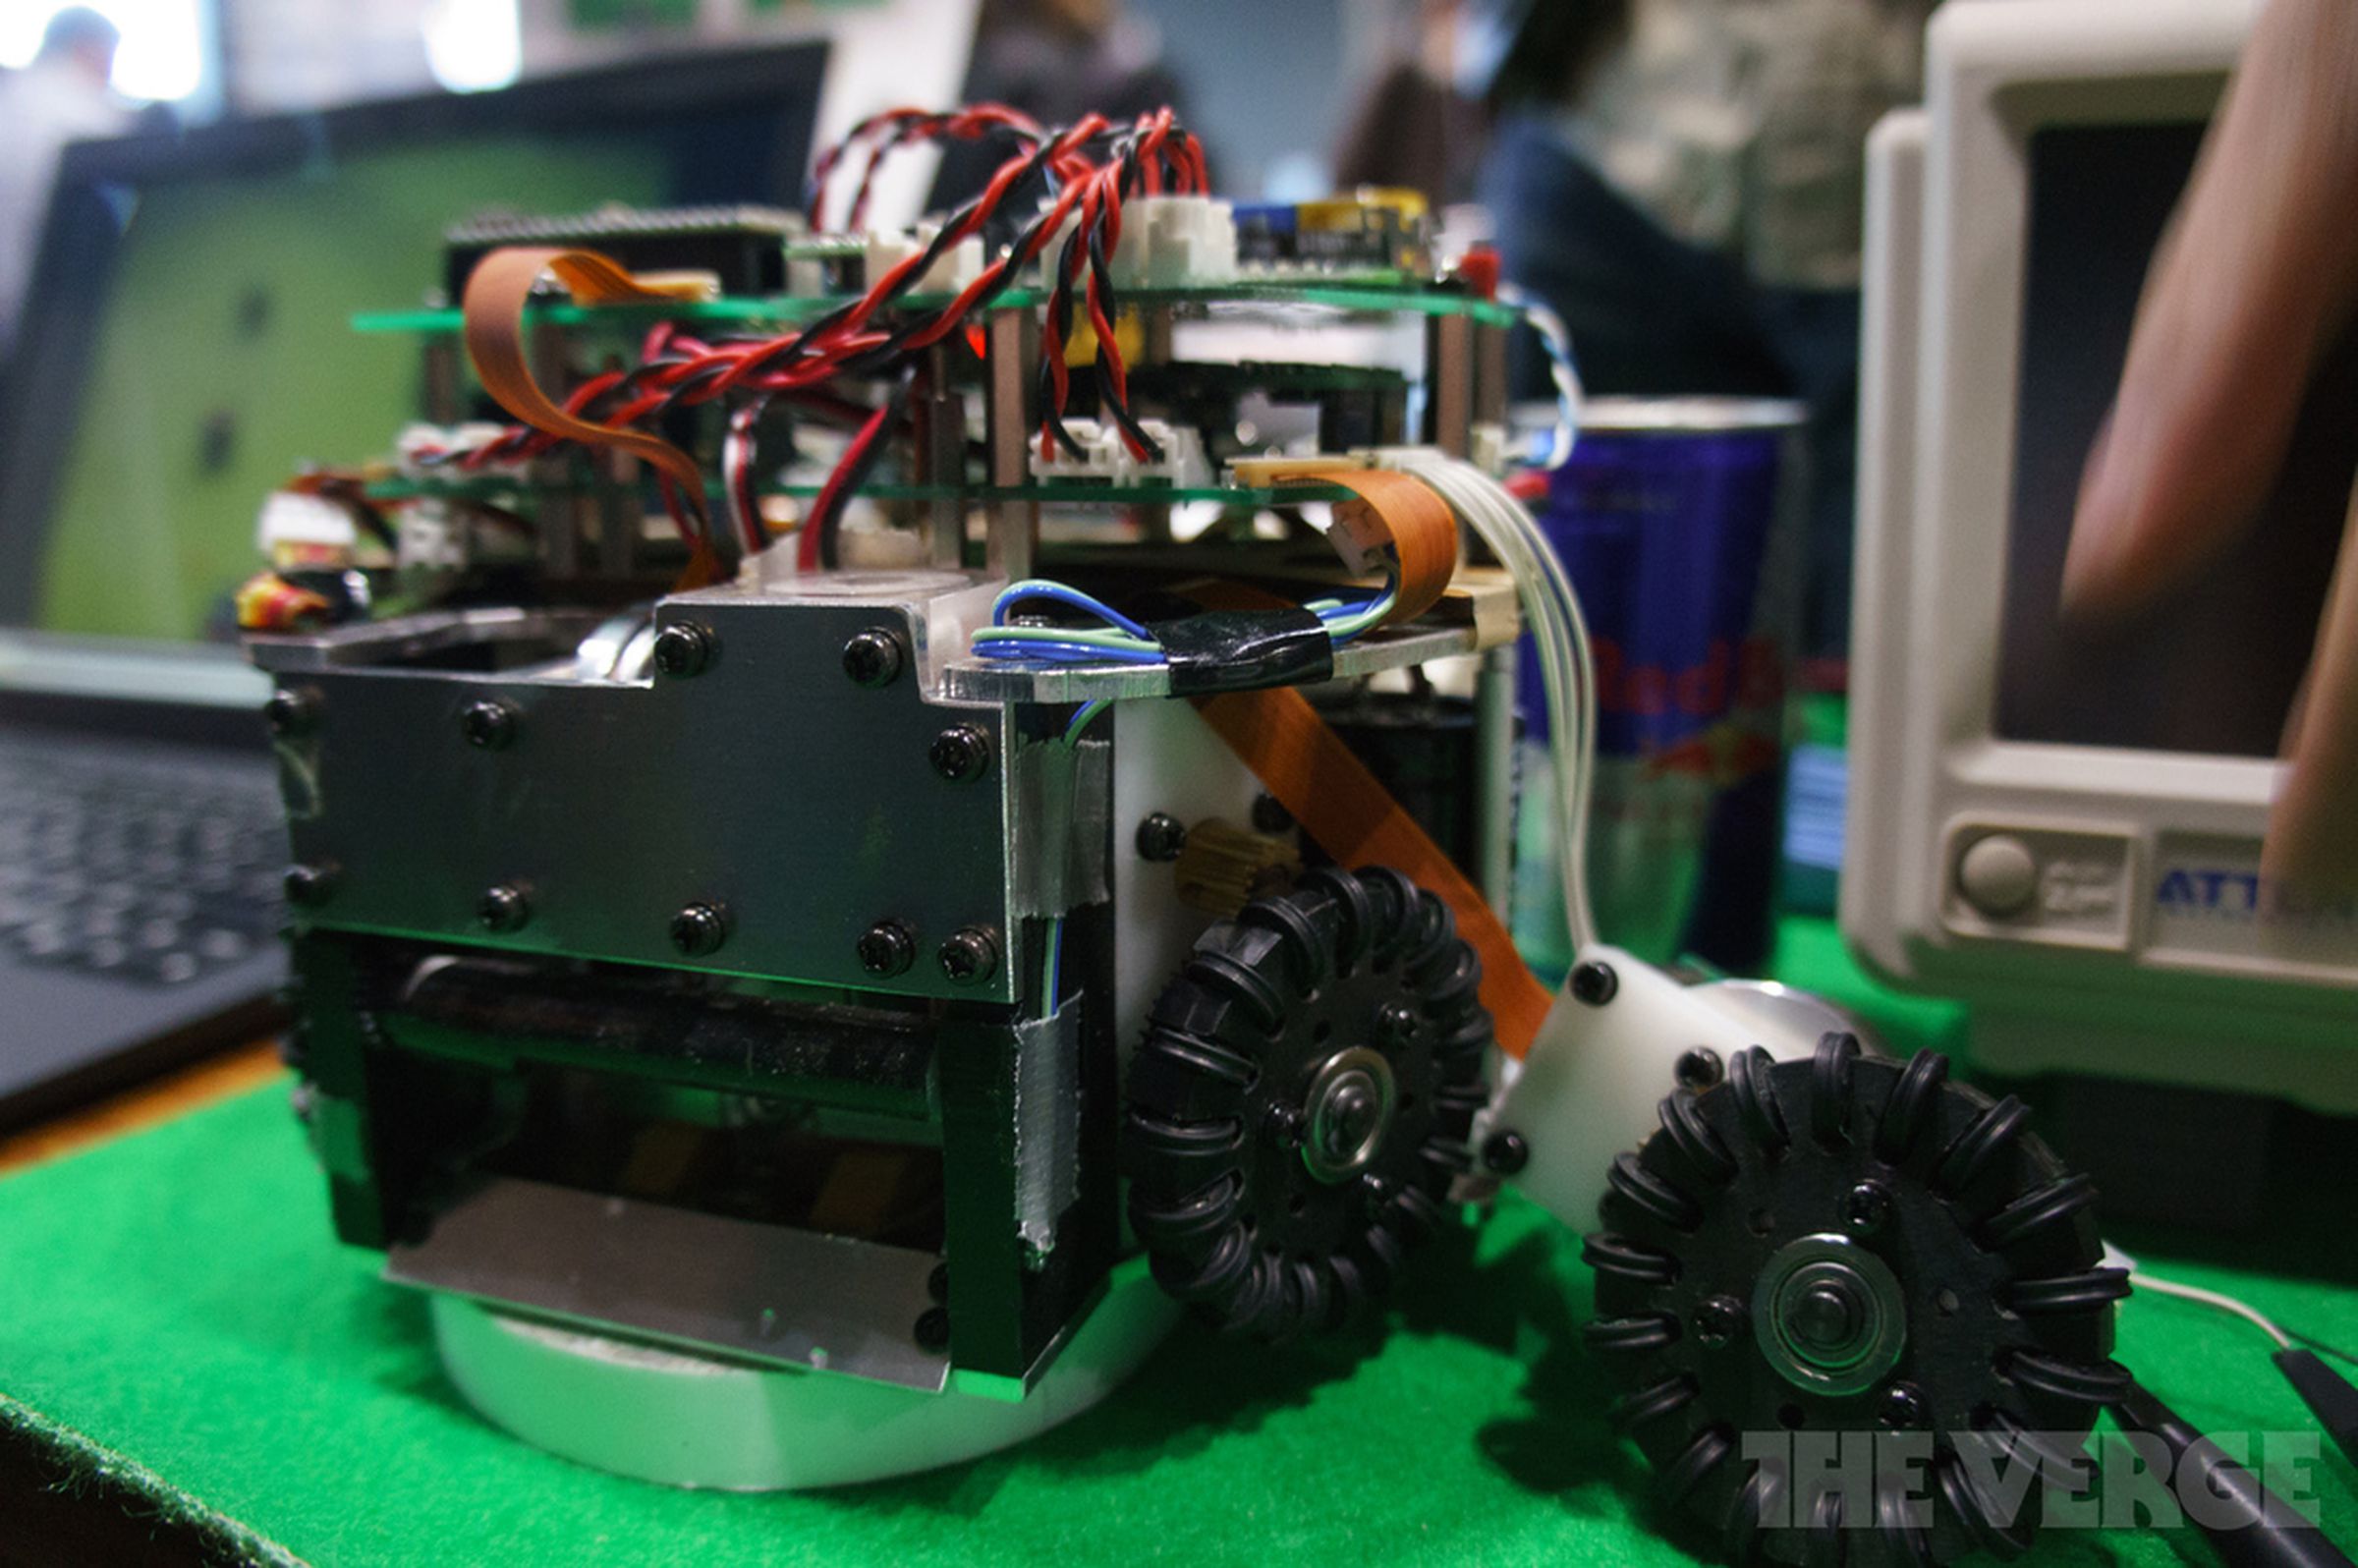 Pictures from Maker Faire Tokyo